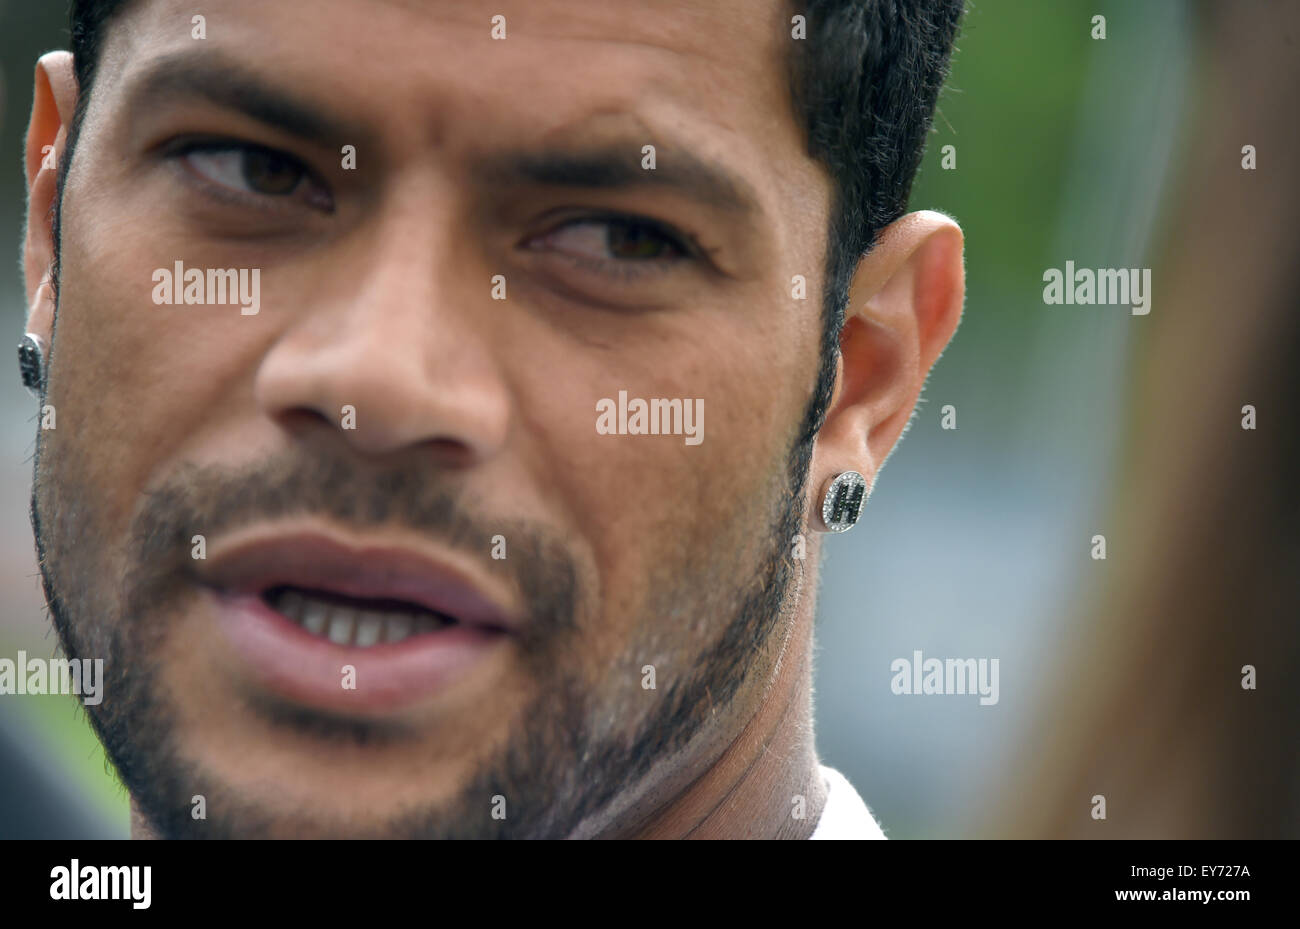 Brazilian national player and player of FC Zenit St. Petersburg, Hulk, talks to media representatives on the training grounds in St. Petersburg, Russia, 20 July 2015. Racist comments are part of the everyday life in Russian soccer, Hulk said. 'That happens during every match. I used to get mad. Today I blow the supporters kisses', the striker said on Monday. Photo: Marcus Brandt/dpa Stock Photo